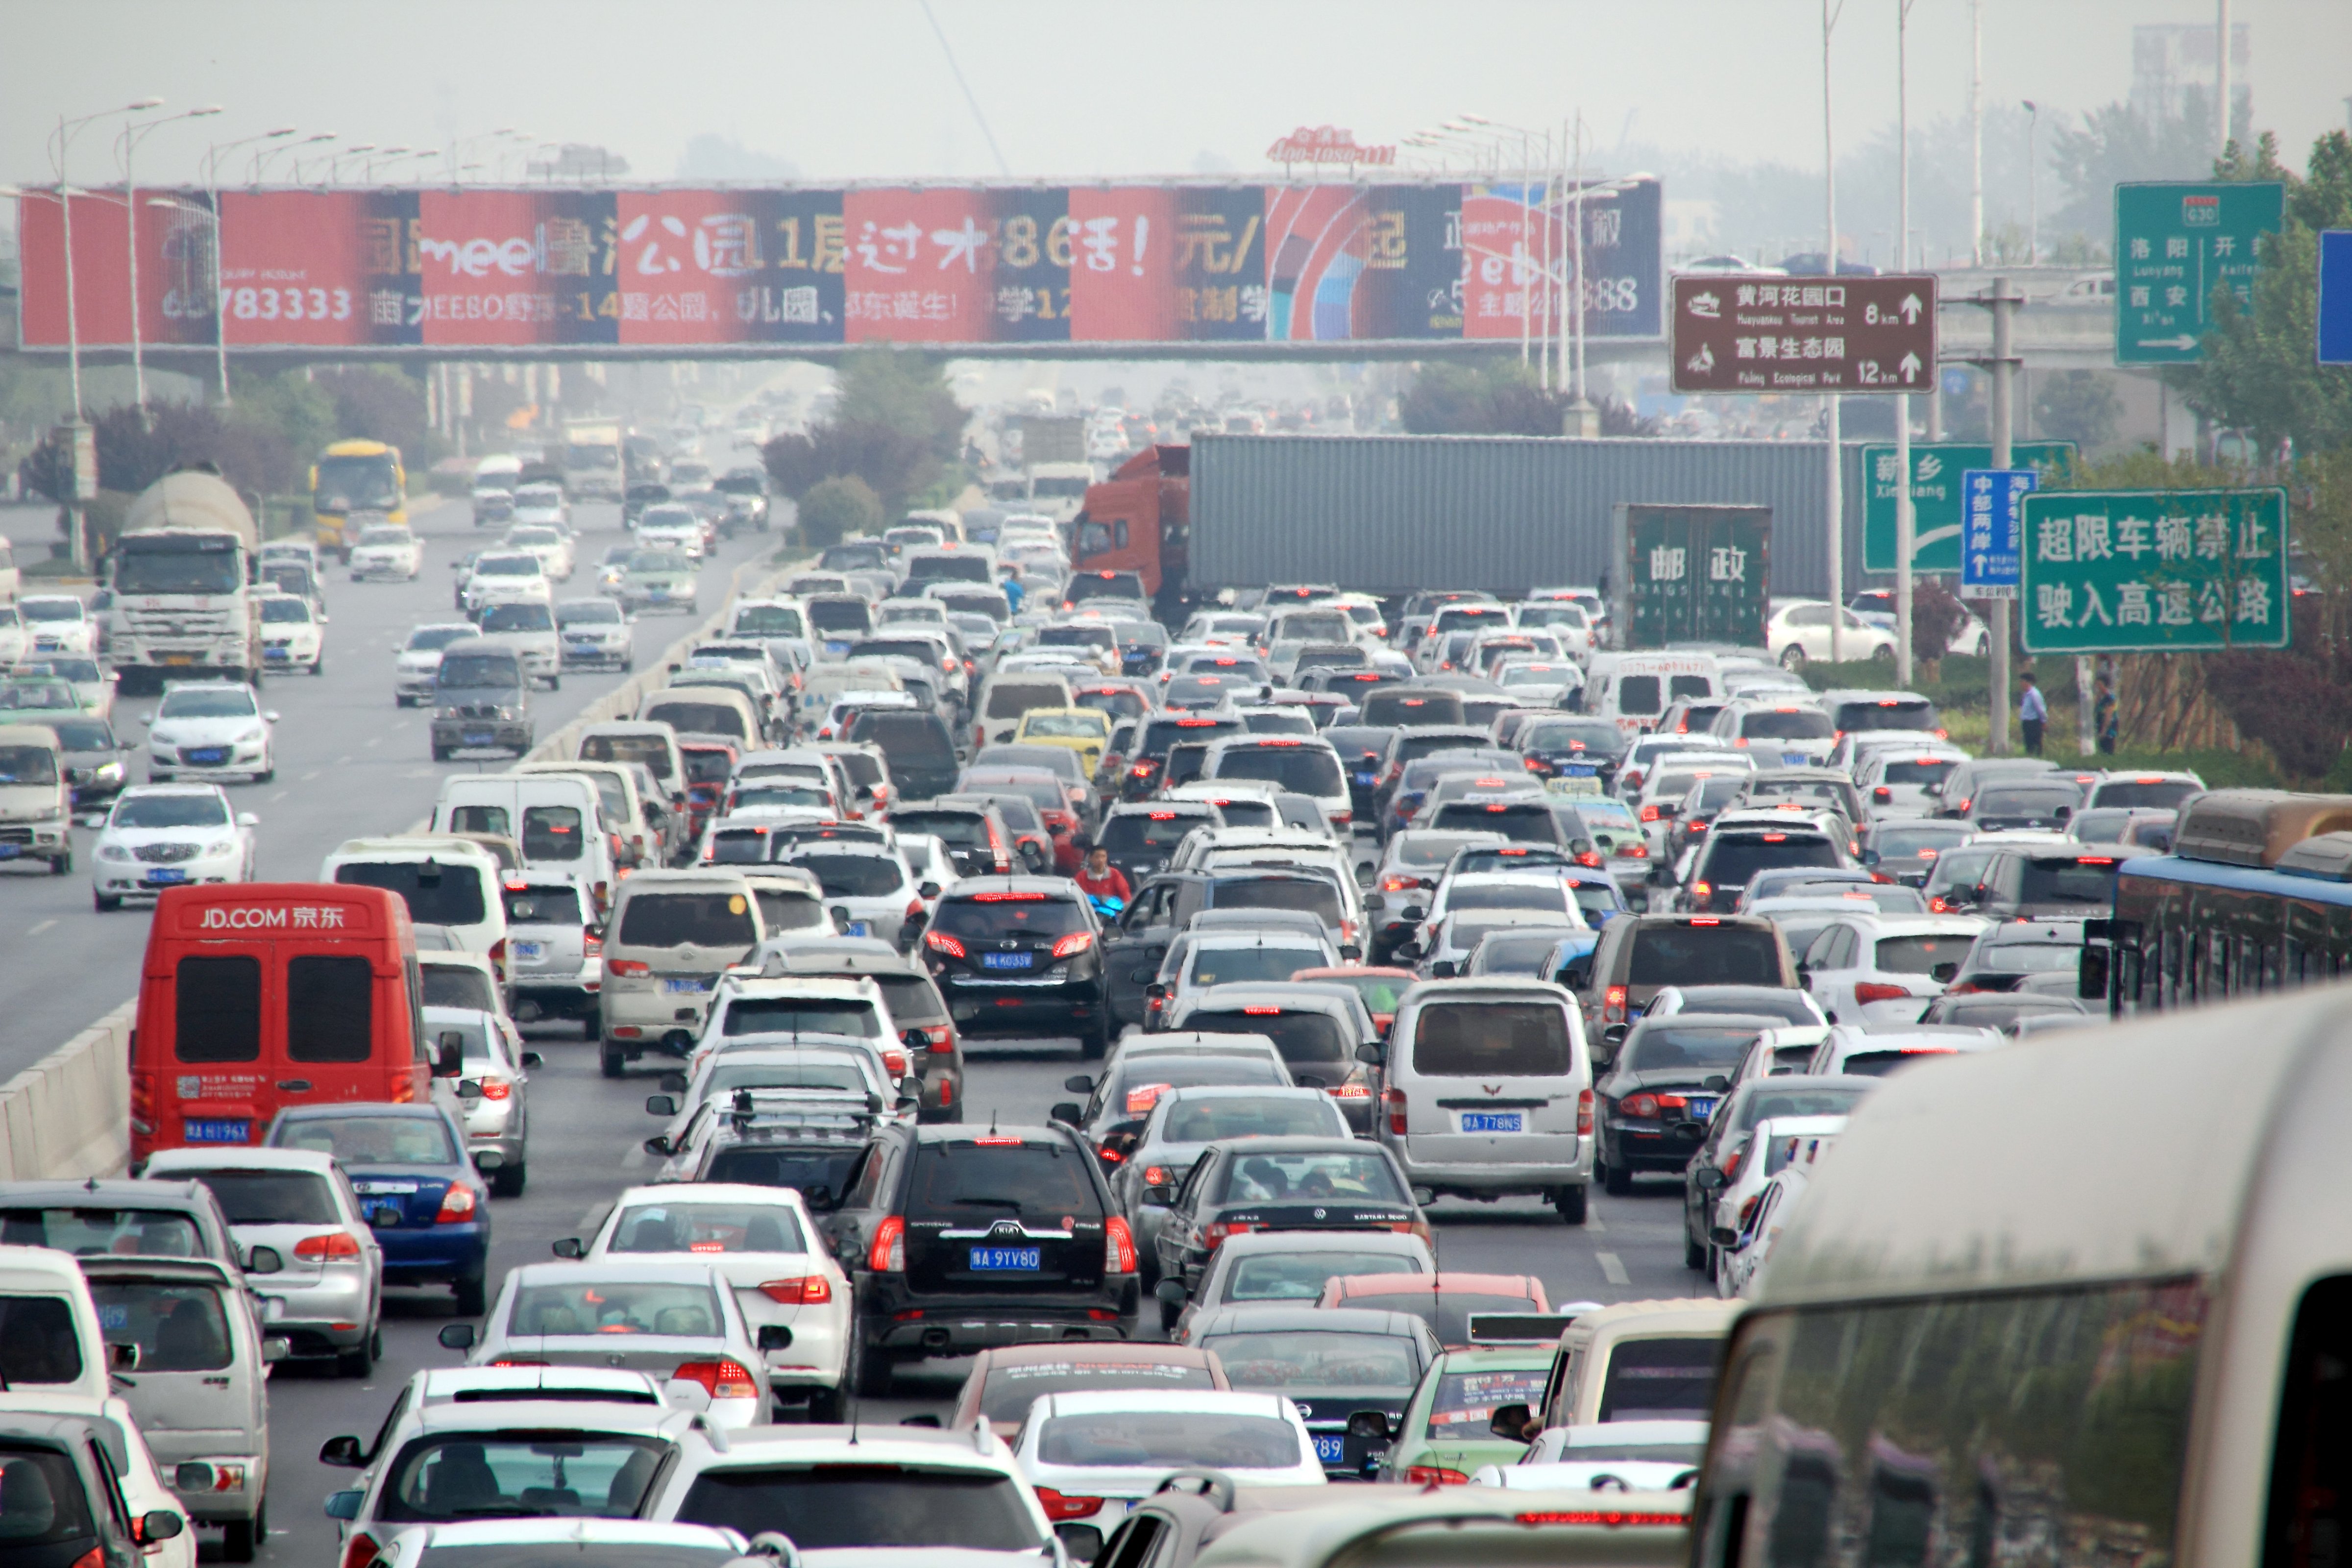 Masses of vehicles move slowly during a traffic jam near the entrance to Lianhuo (Lianyungang-Khorgos) Expressway during the Labor Day holiday in Zhengzhou city, central China's Henan province, 1 May 2015. (Feng lei—Imaginechina/AP)